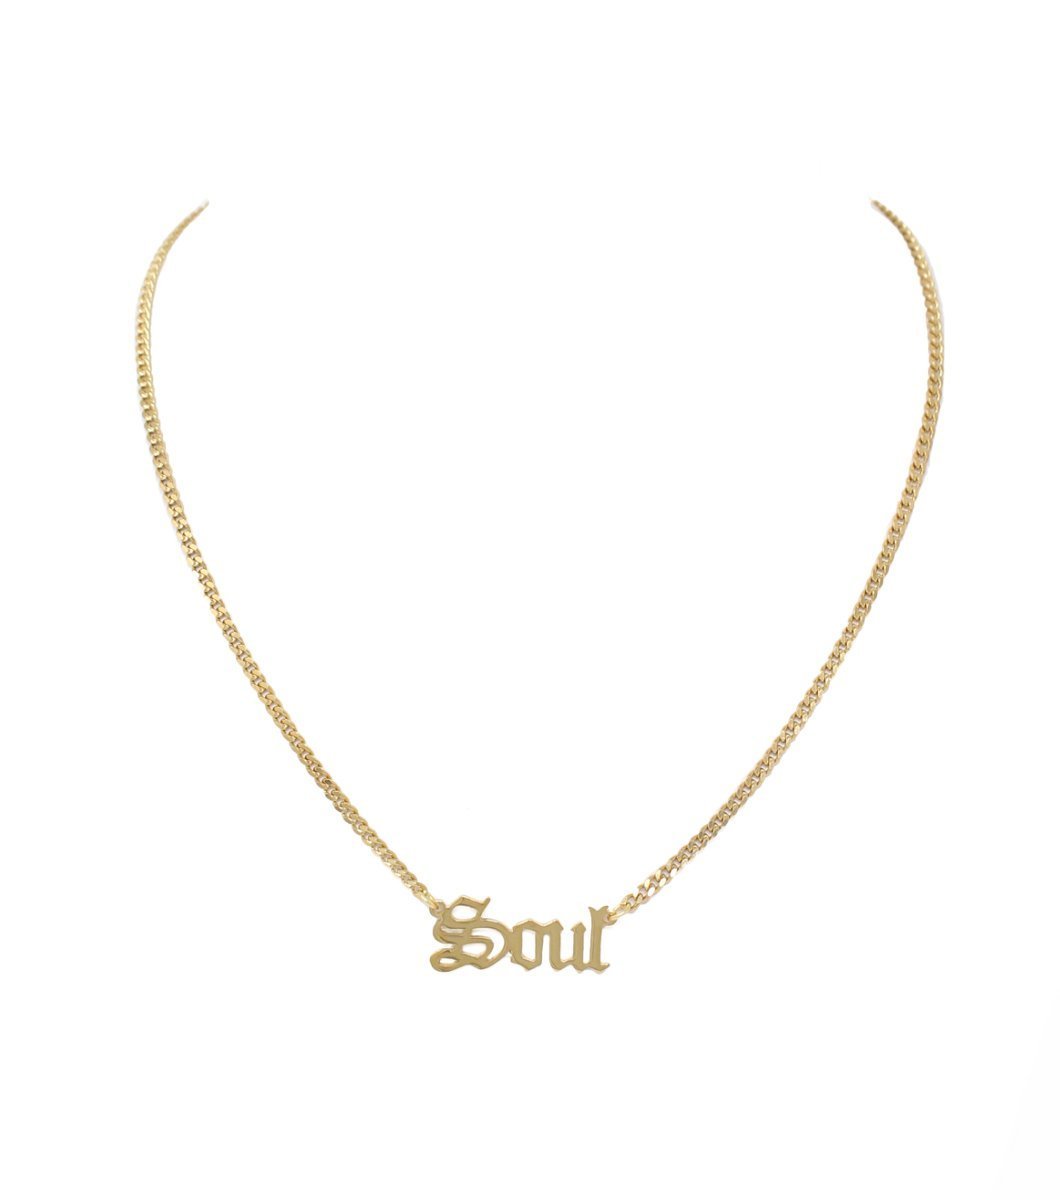 One Self Reminder Soul Necklace - LAURA CANTU JEWELRY US